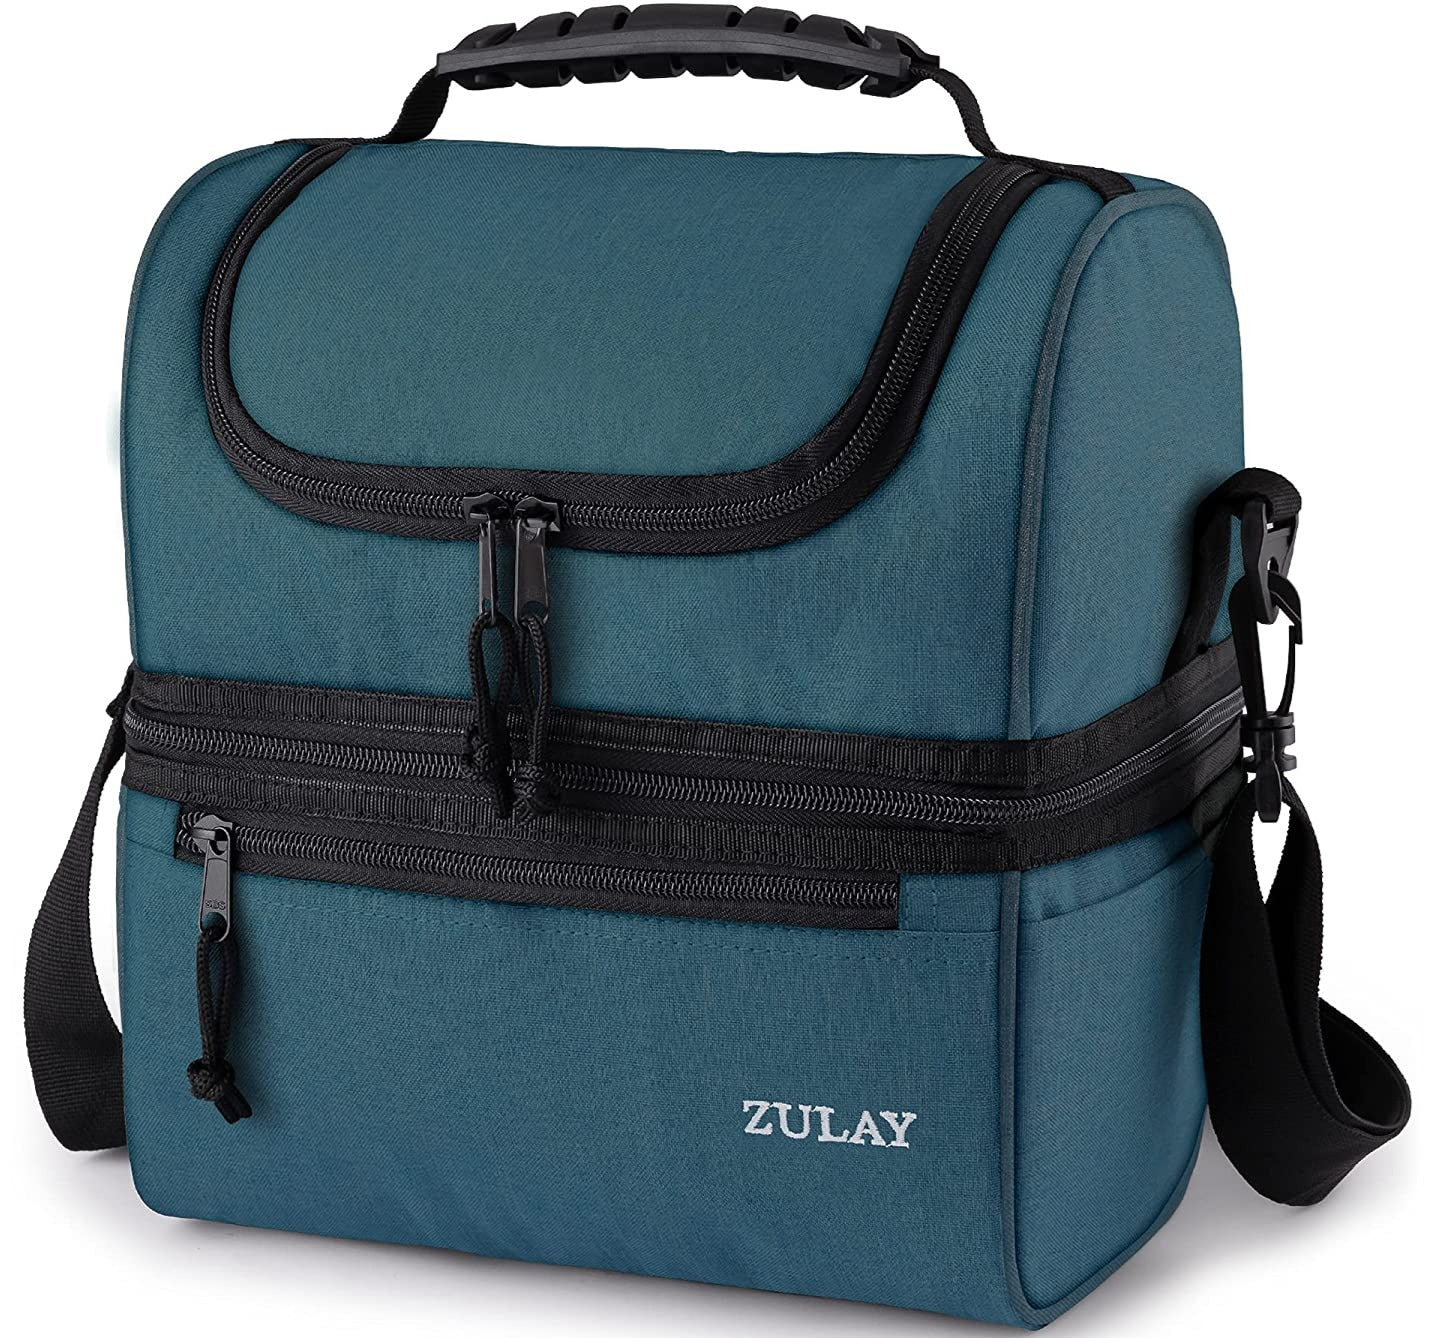 Insulated 2-Compartment Lunch Box Bag With Strap - Zulay KitchenZulay Kitchen